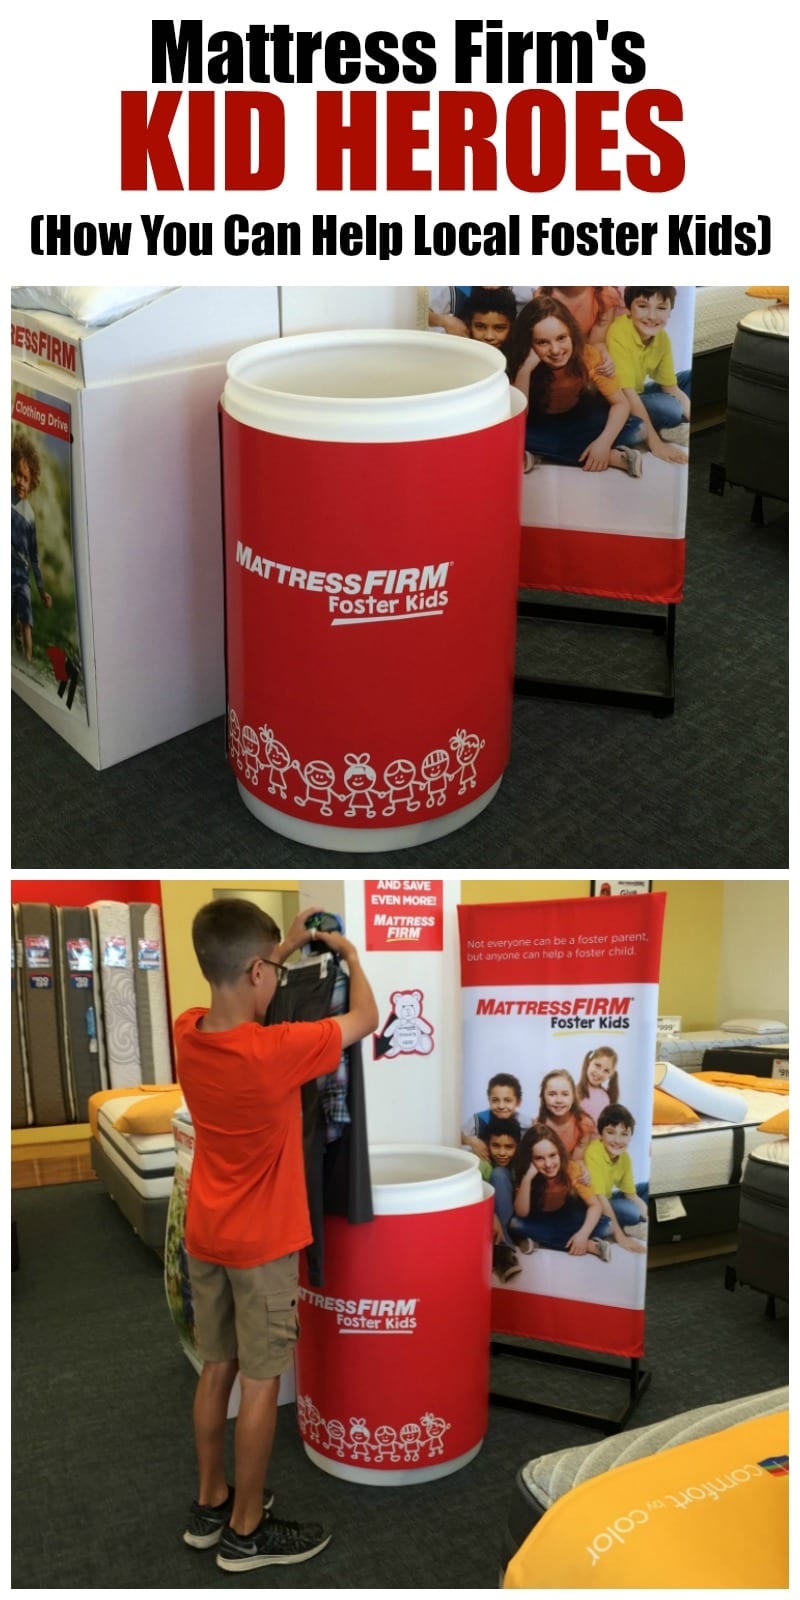 Make a difference by donating new clothing items to your local Mattress Firm store in support of their Foster Kids Program. Get your kids involved by entering them into their Kid Heroes contest. Find out all of the info on www.momfabulous.com. AD 